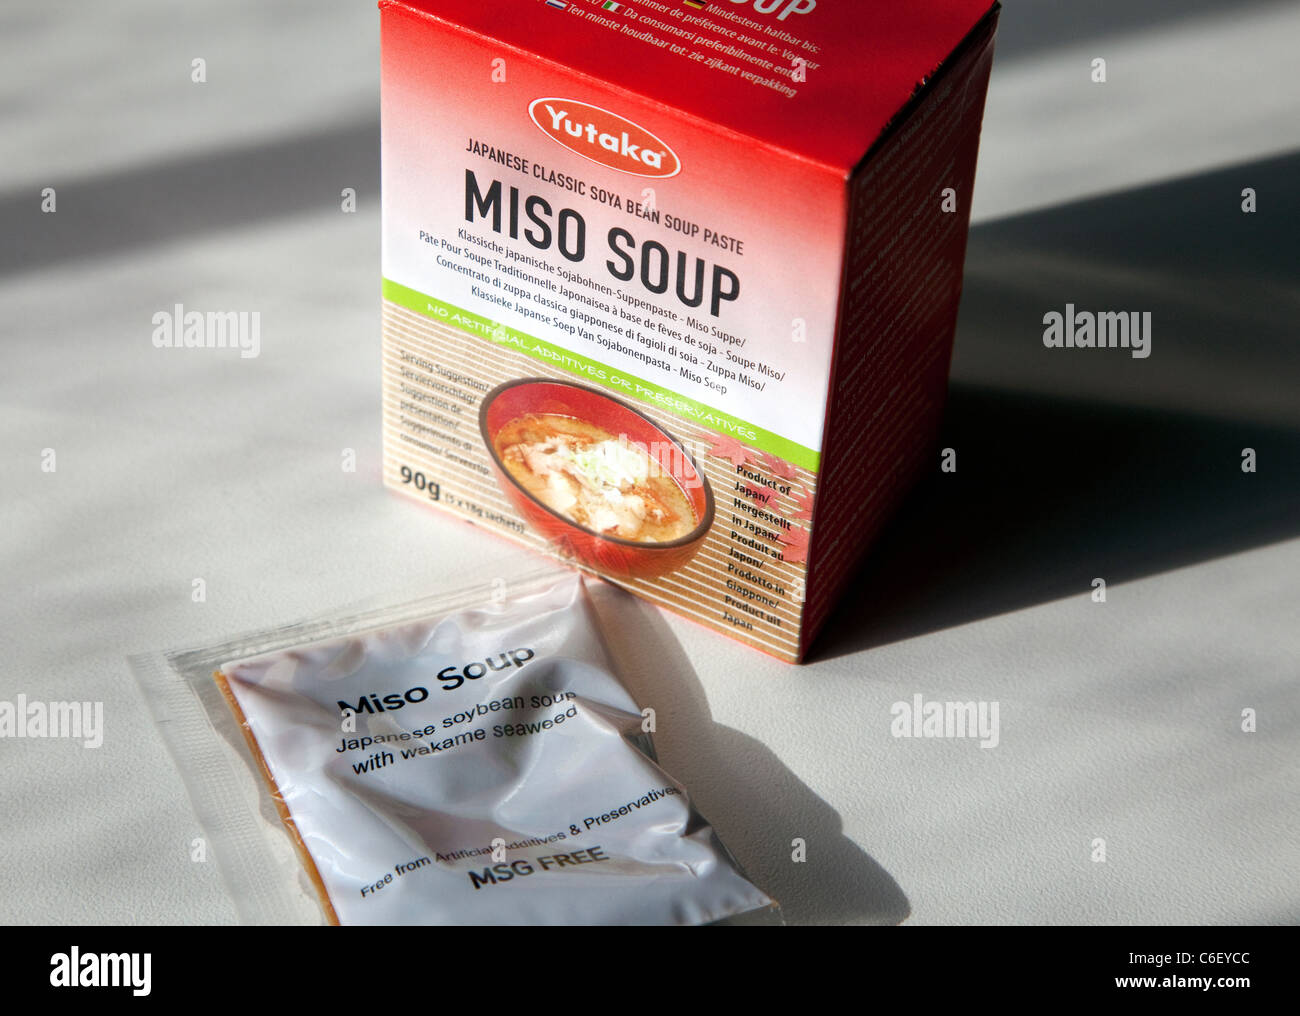 Japanese miso soup with wakame seaweed packets, London Stock Photo